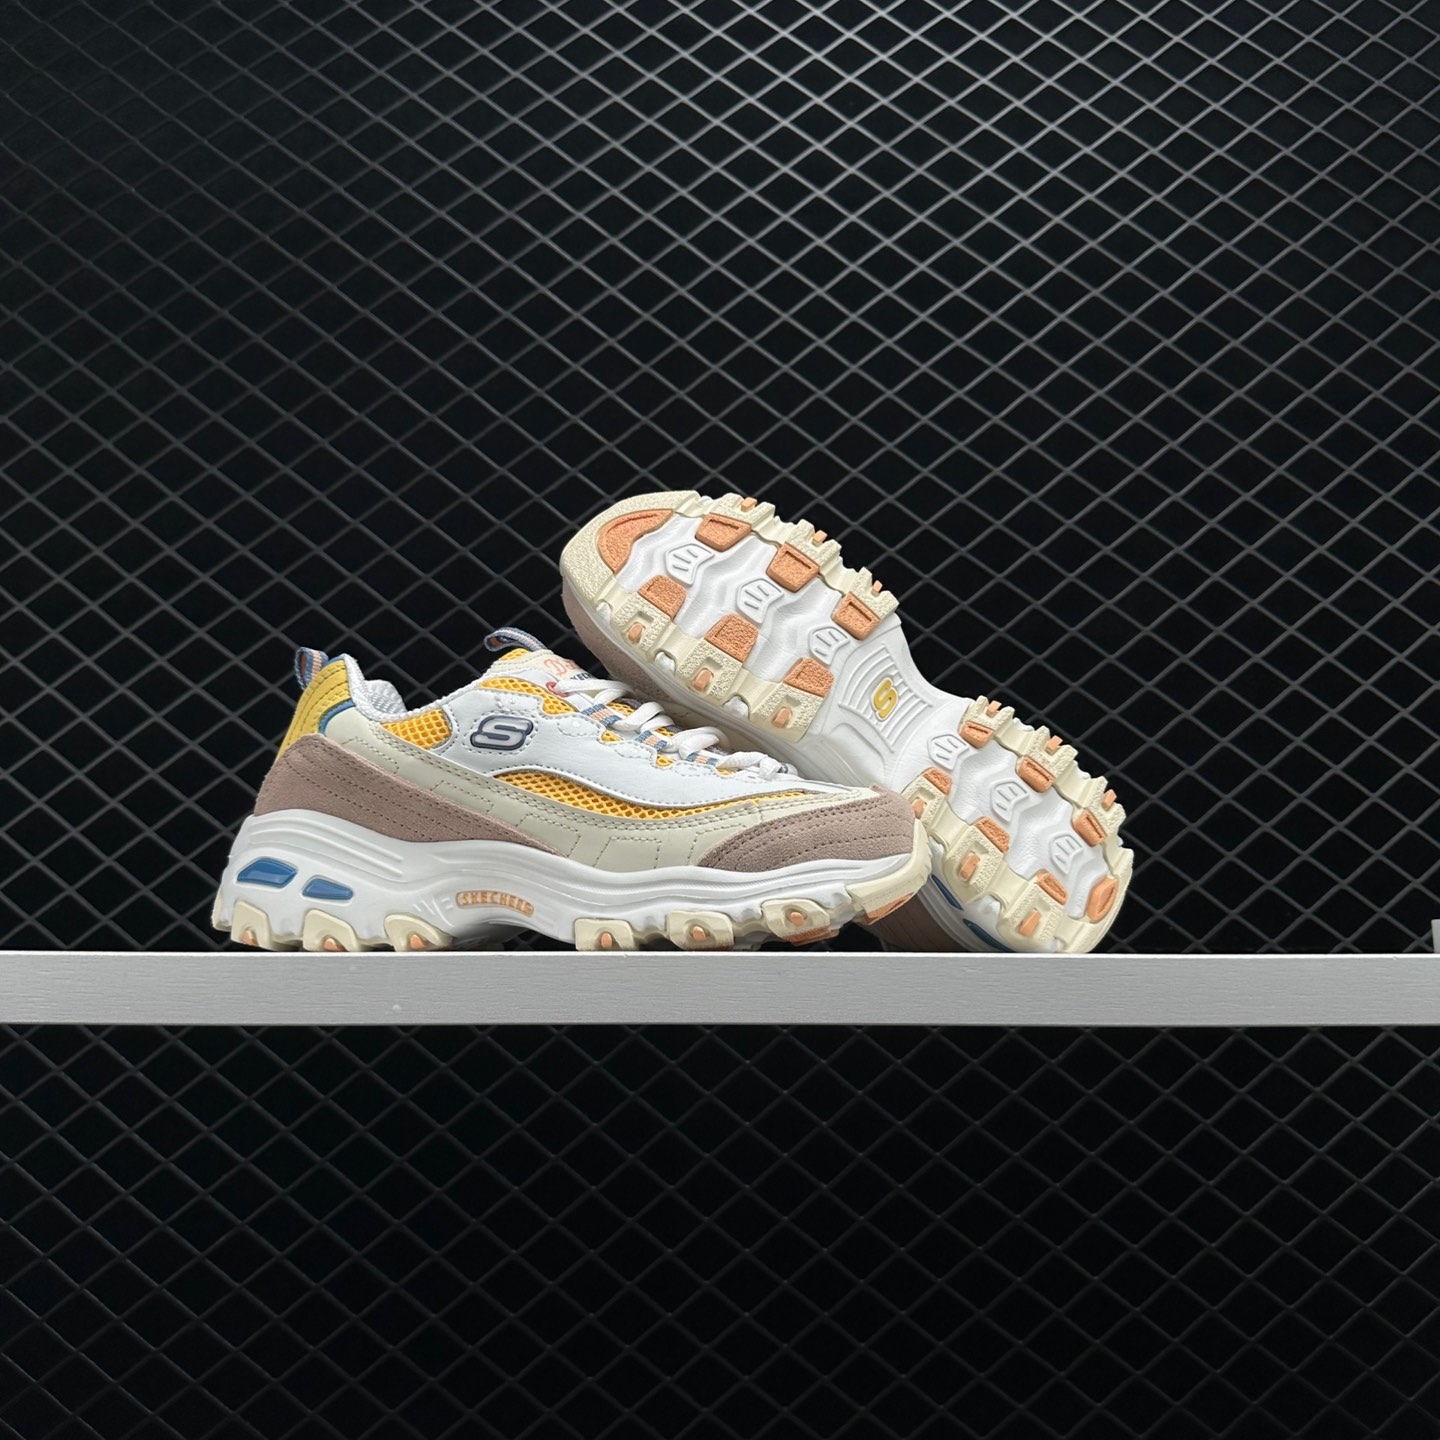 Skechers D'Lites 1.0 Low Running Shoes GS White Yellow 13146-WYL - Stylish and Comfortable Athletic Footwear